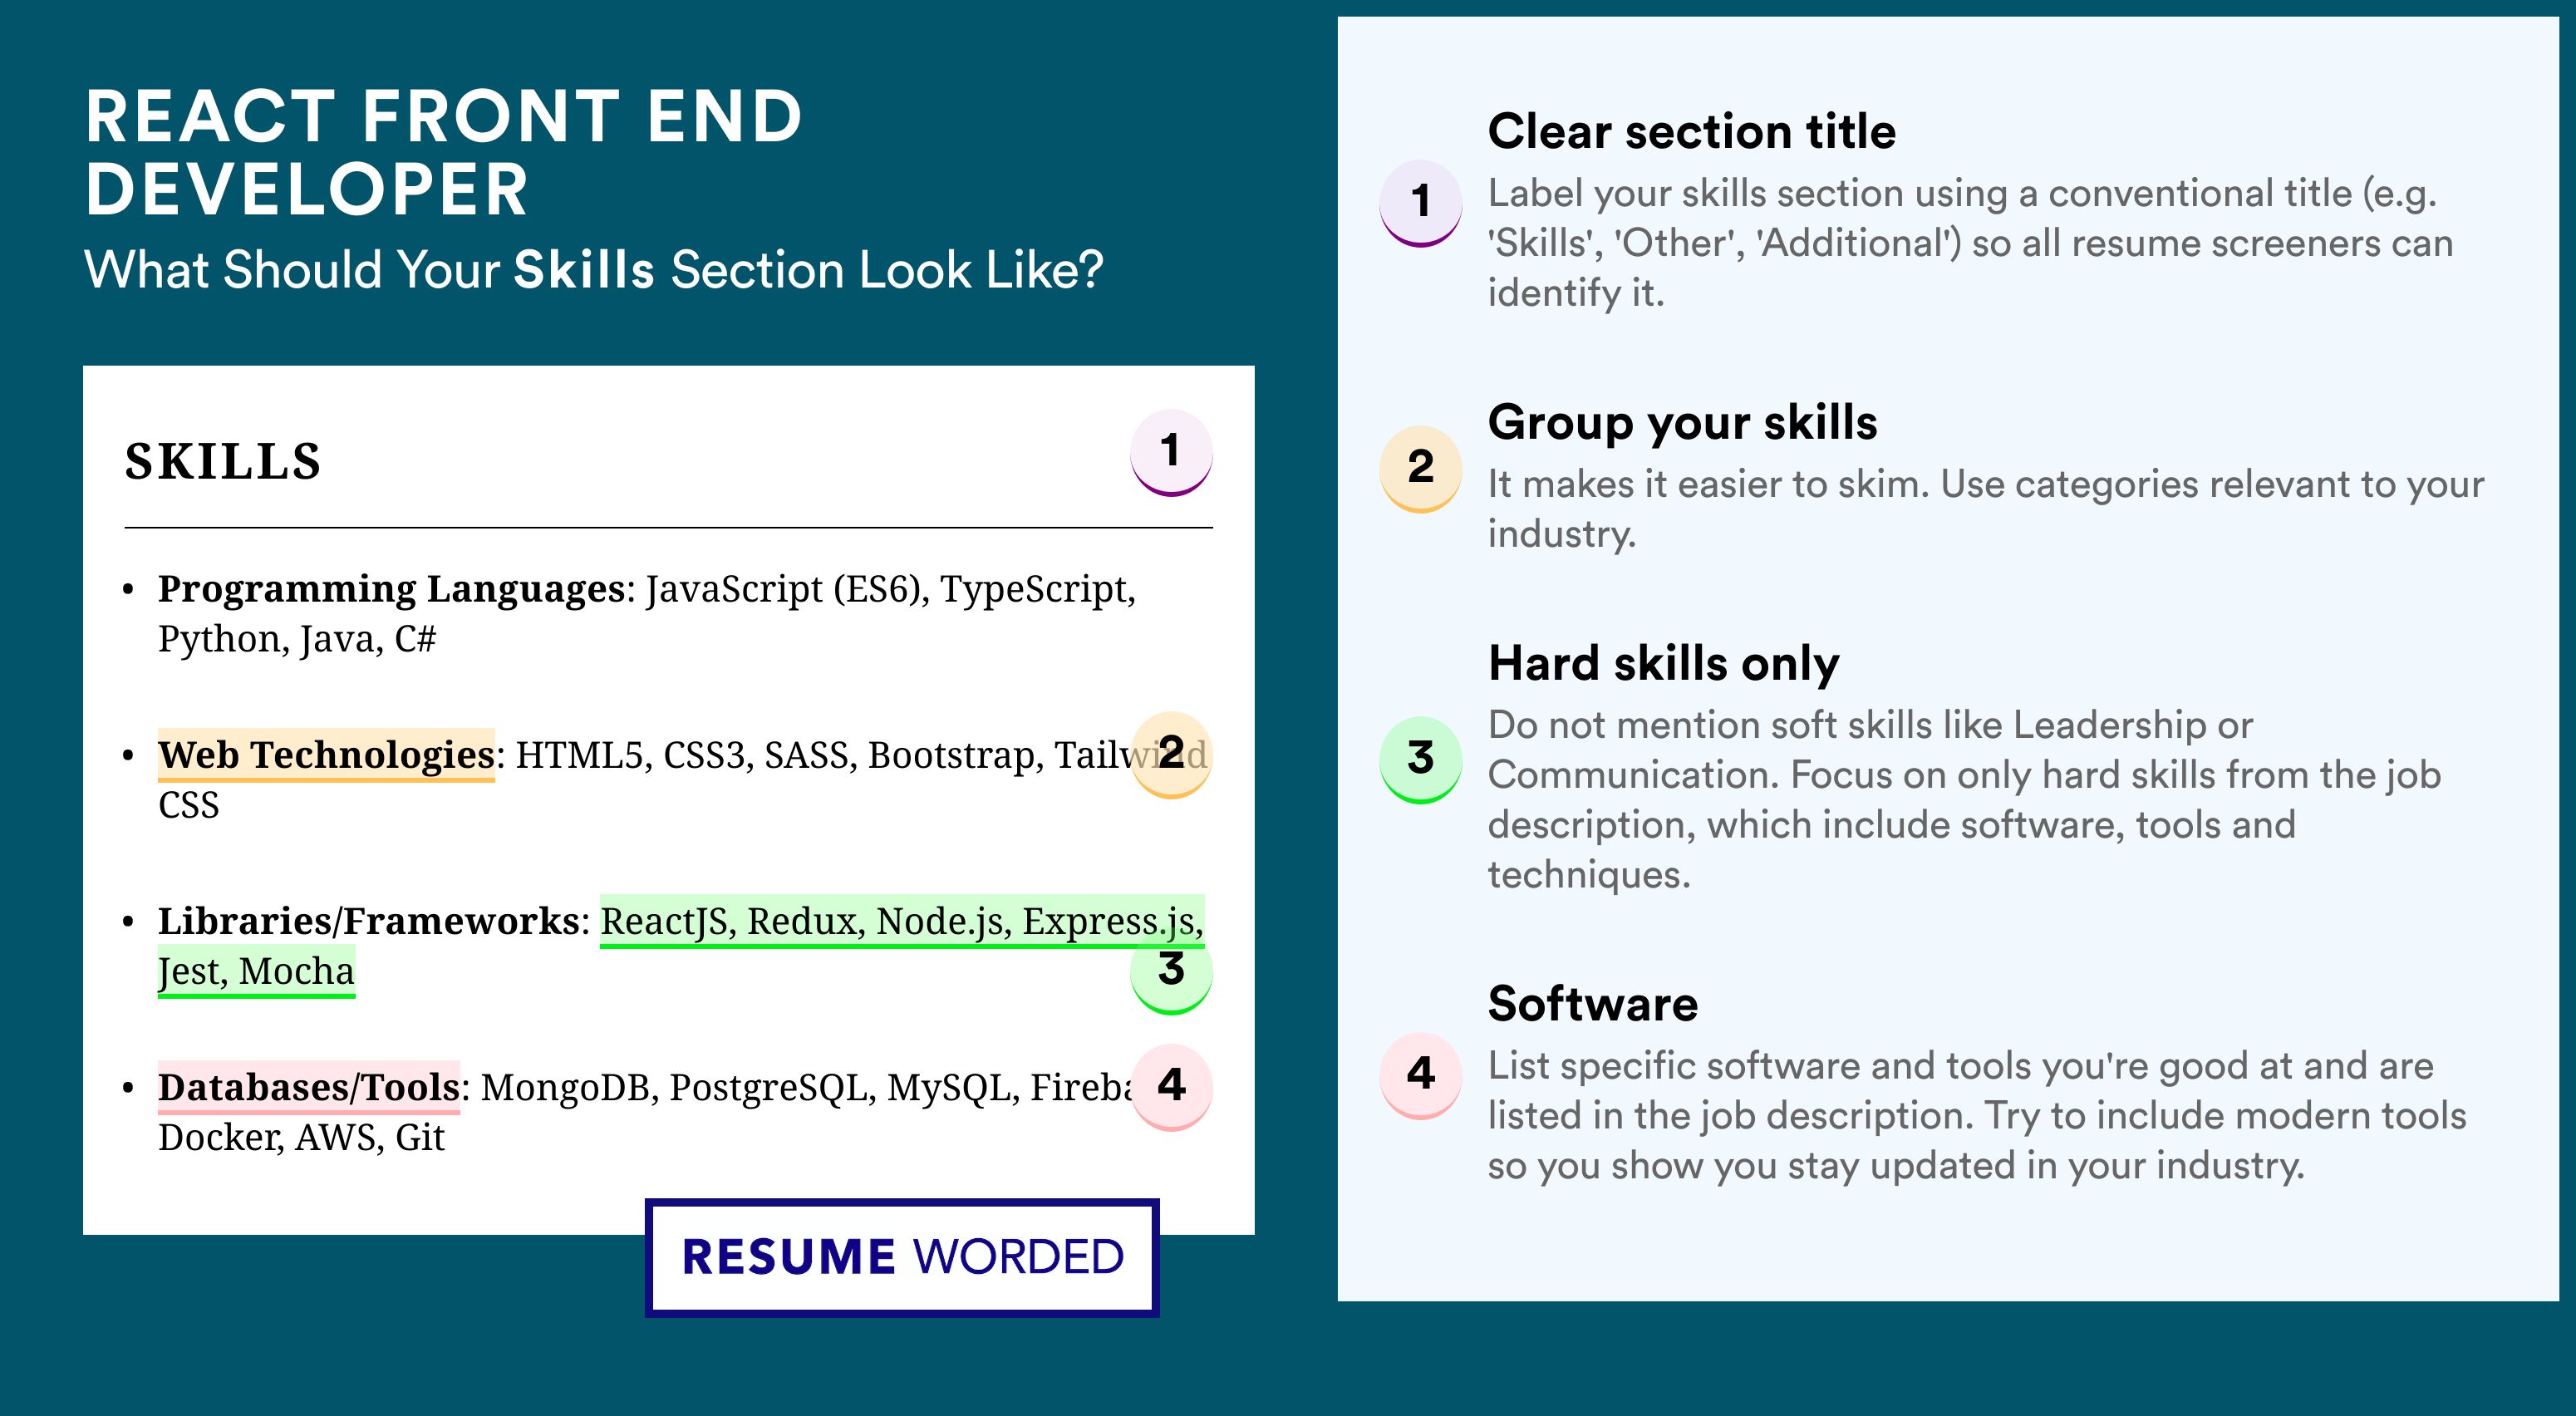 How To Write Your Skills Section - React Front End Developer Roles